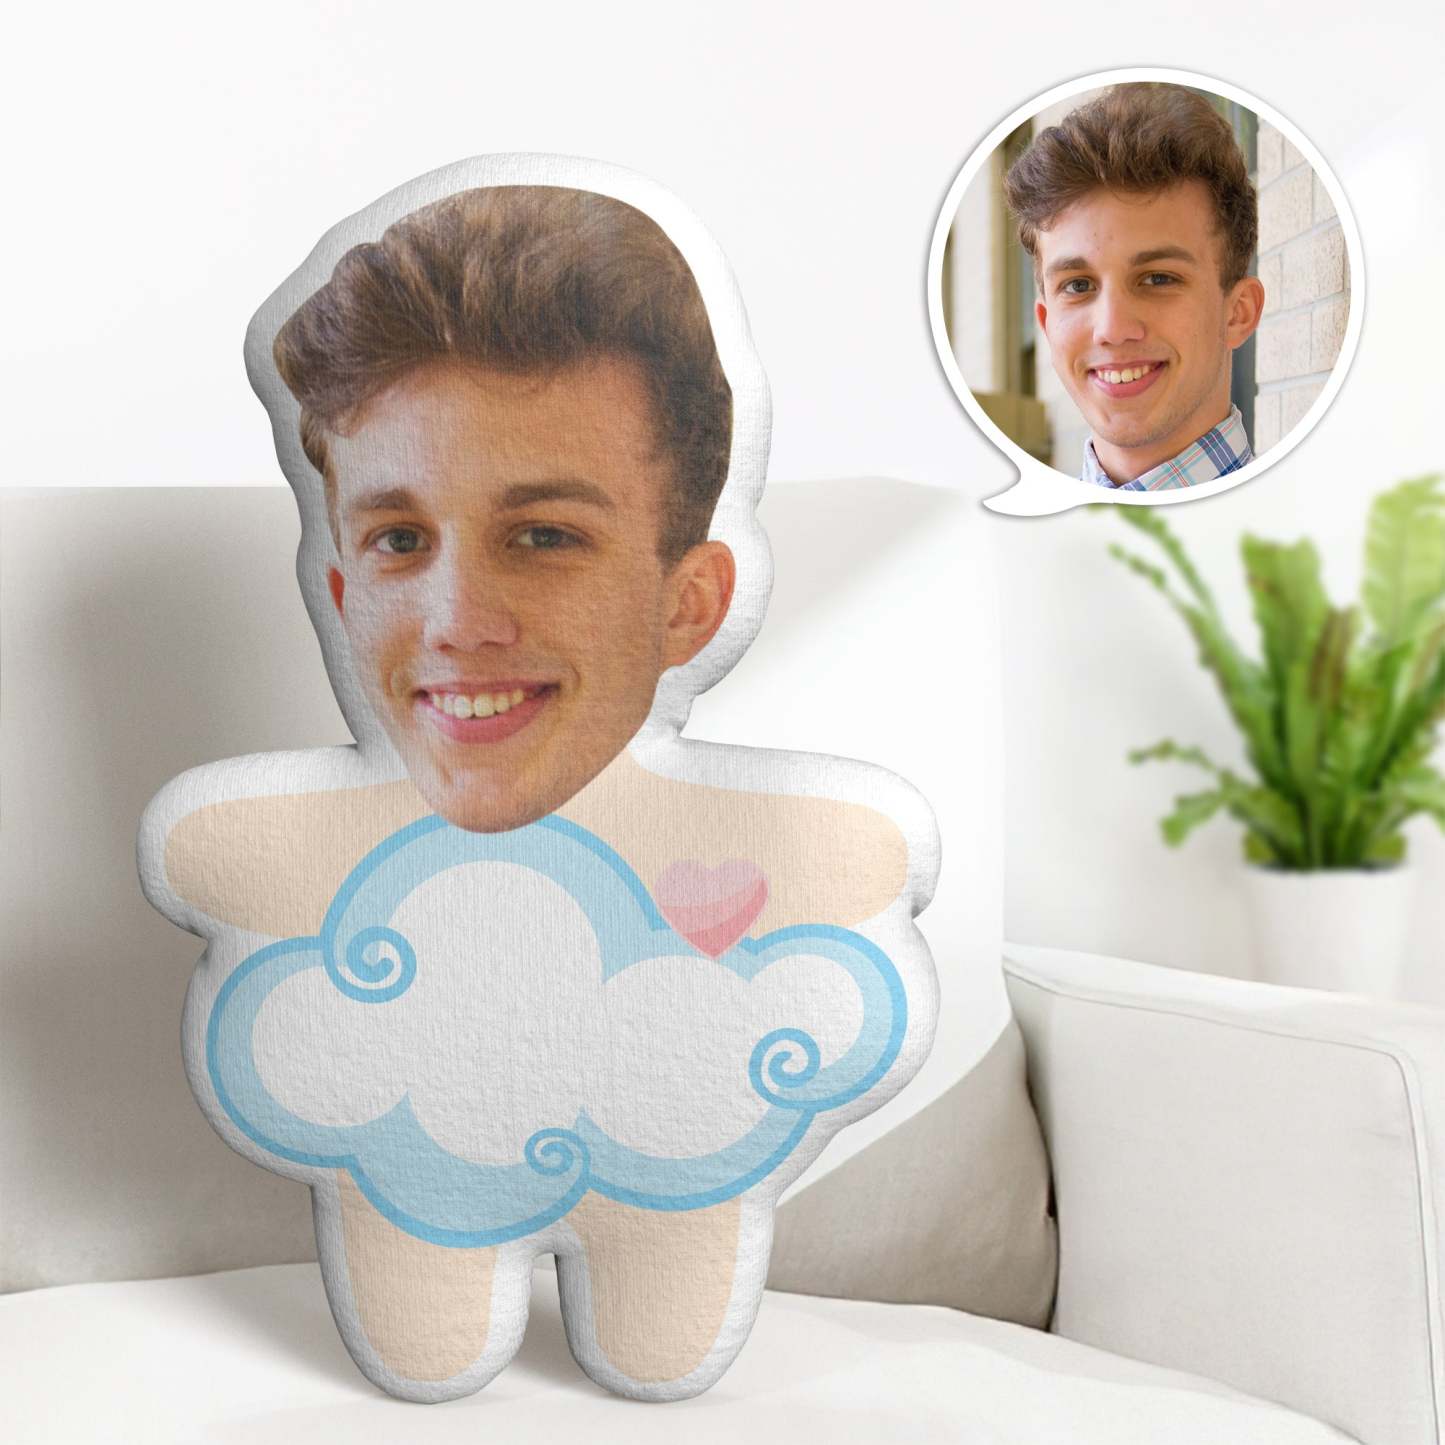 Personalized Face Minime Throw Pillow Custom Cloud Minime Pillow Valentine's Day Gifts - soufeelus